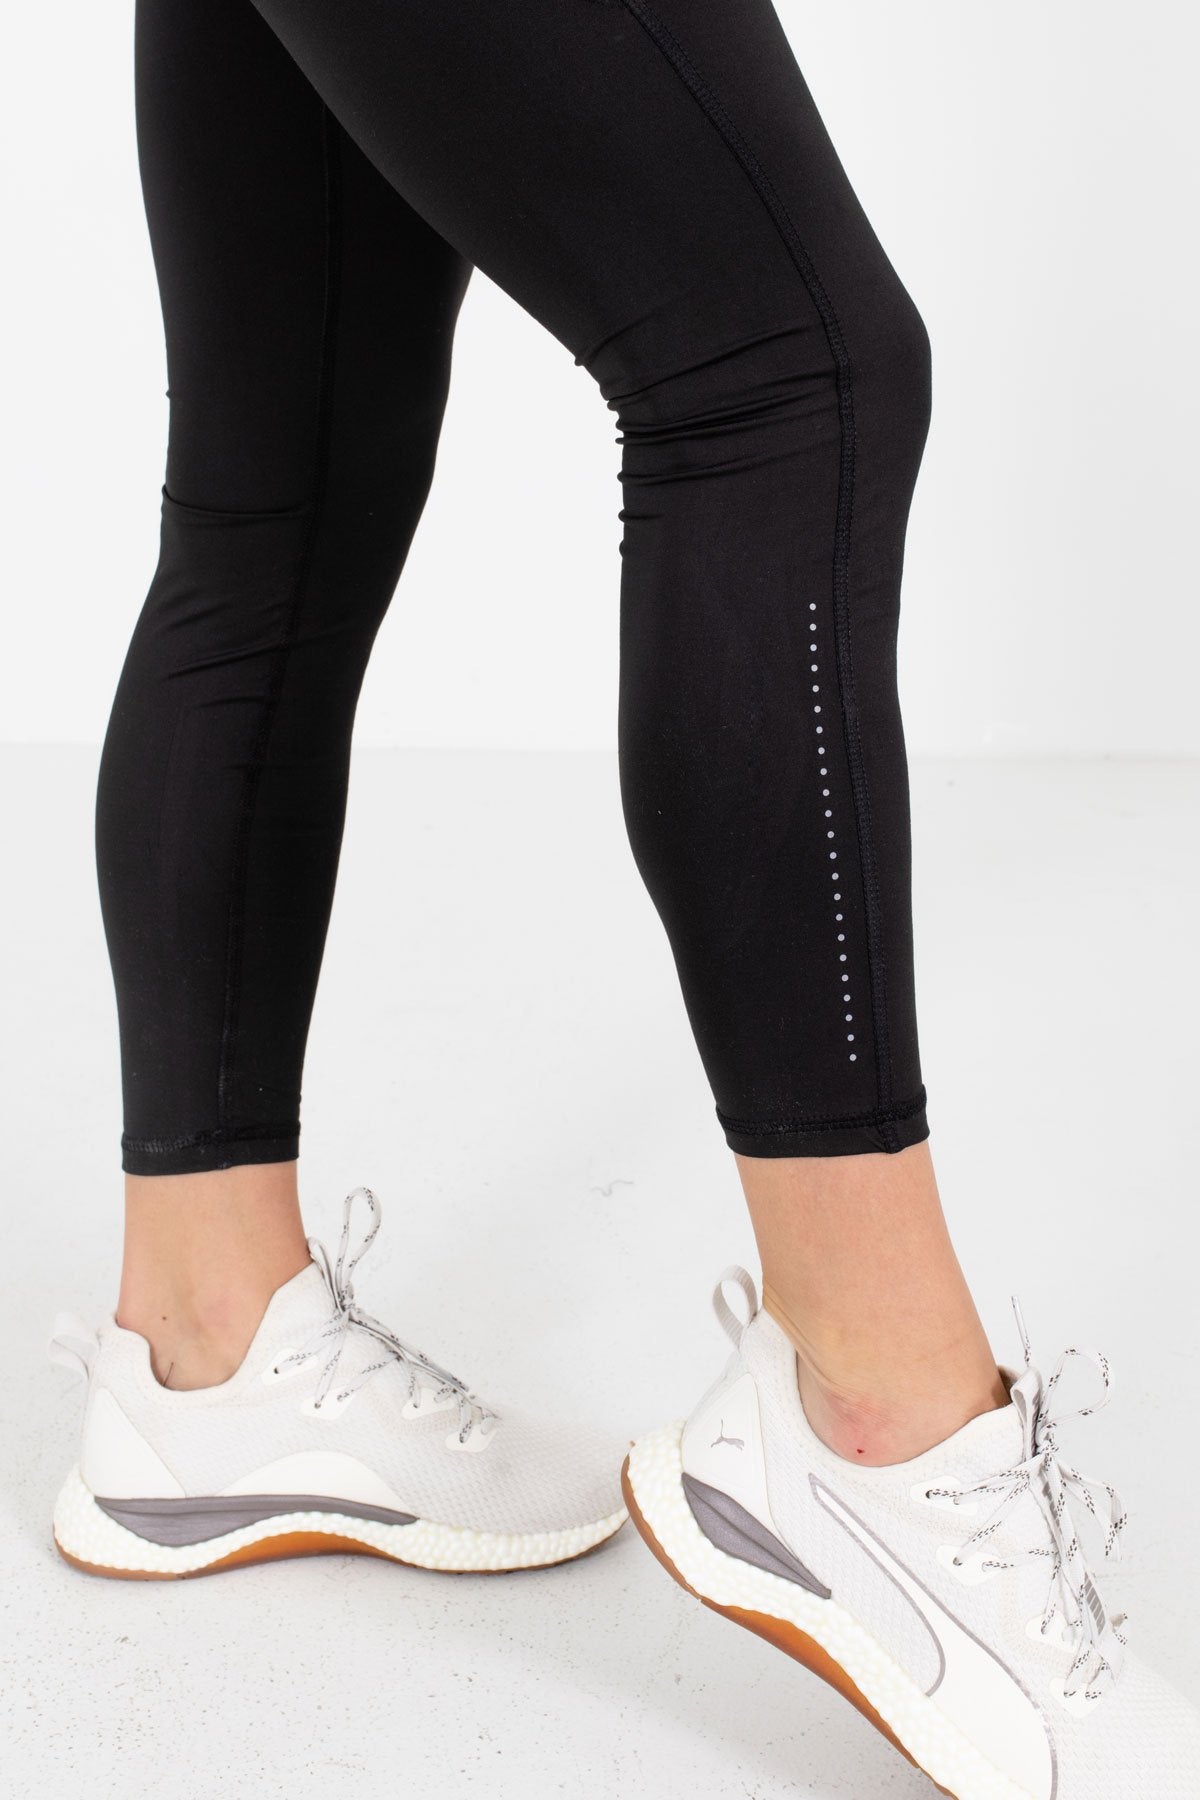 Black Affordable Online Boutique Workout Clothing for Women